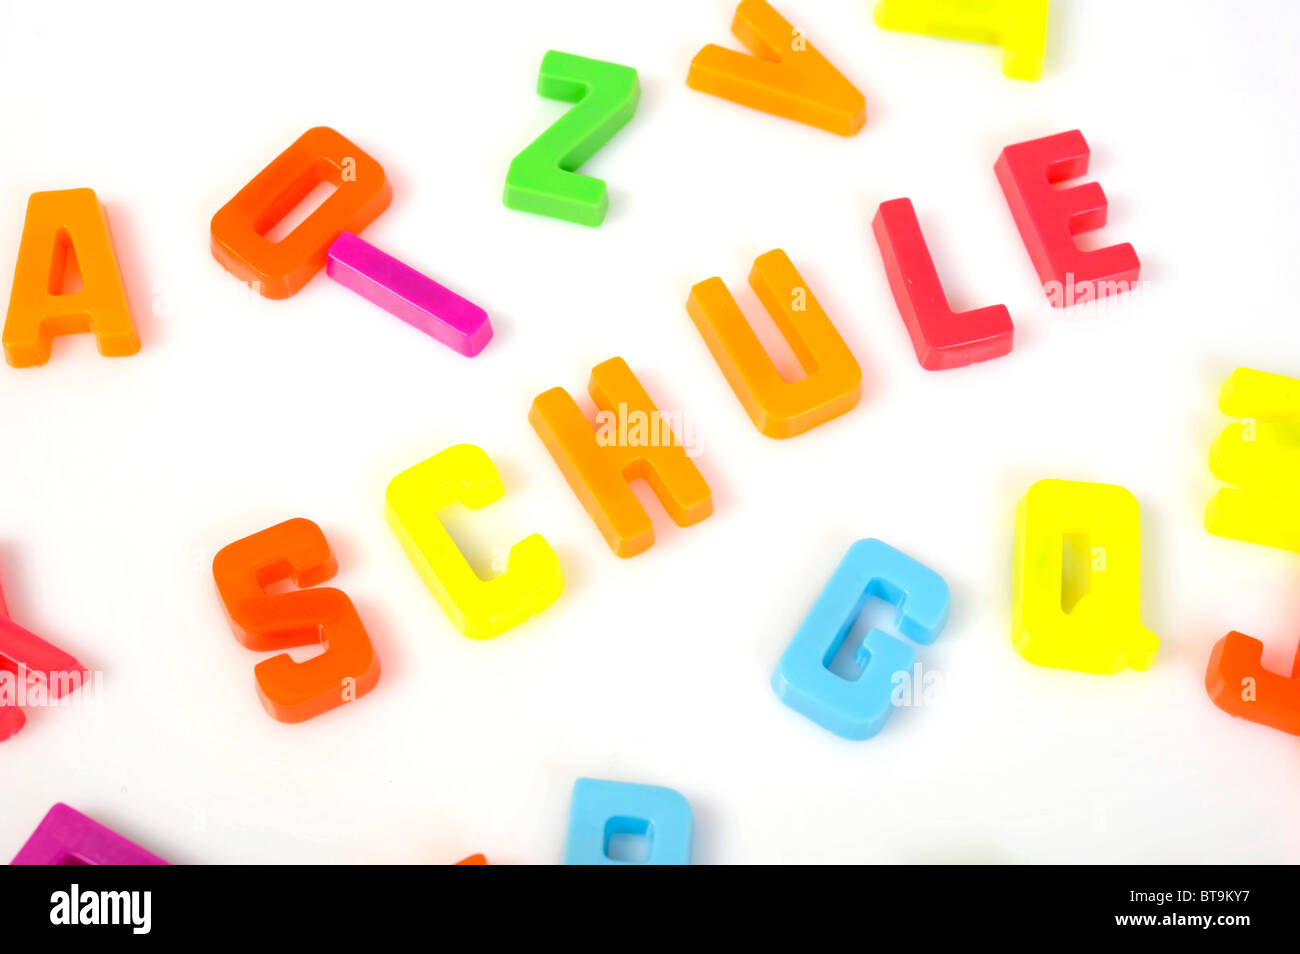 Schule, German for School, written with plastic letters Stock Photo